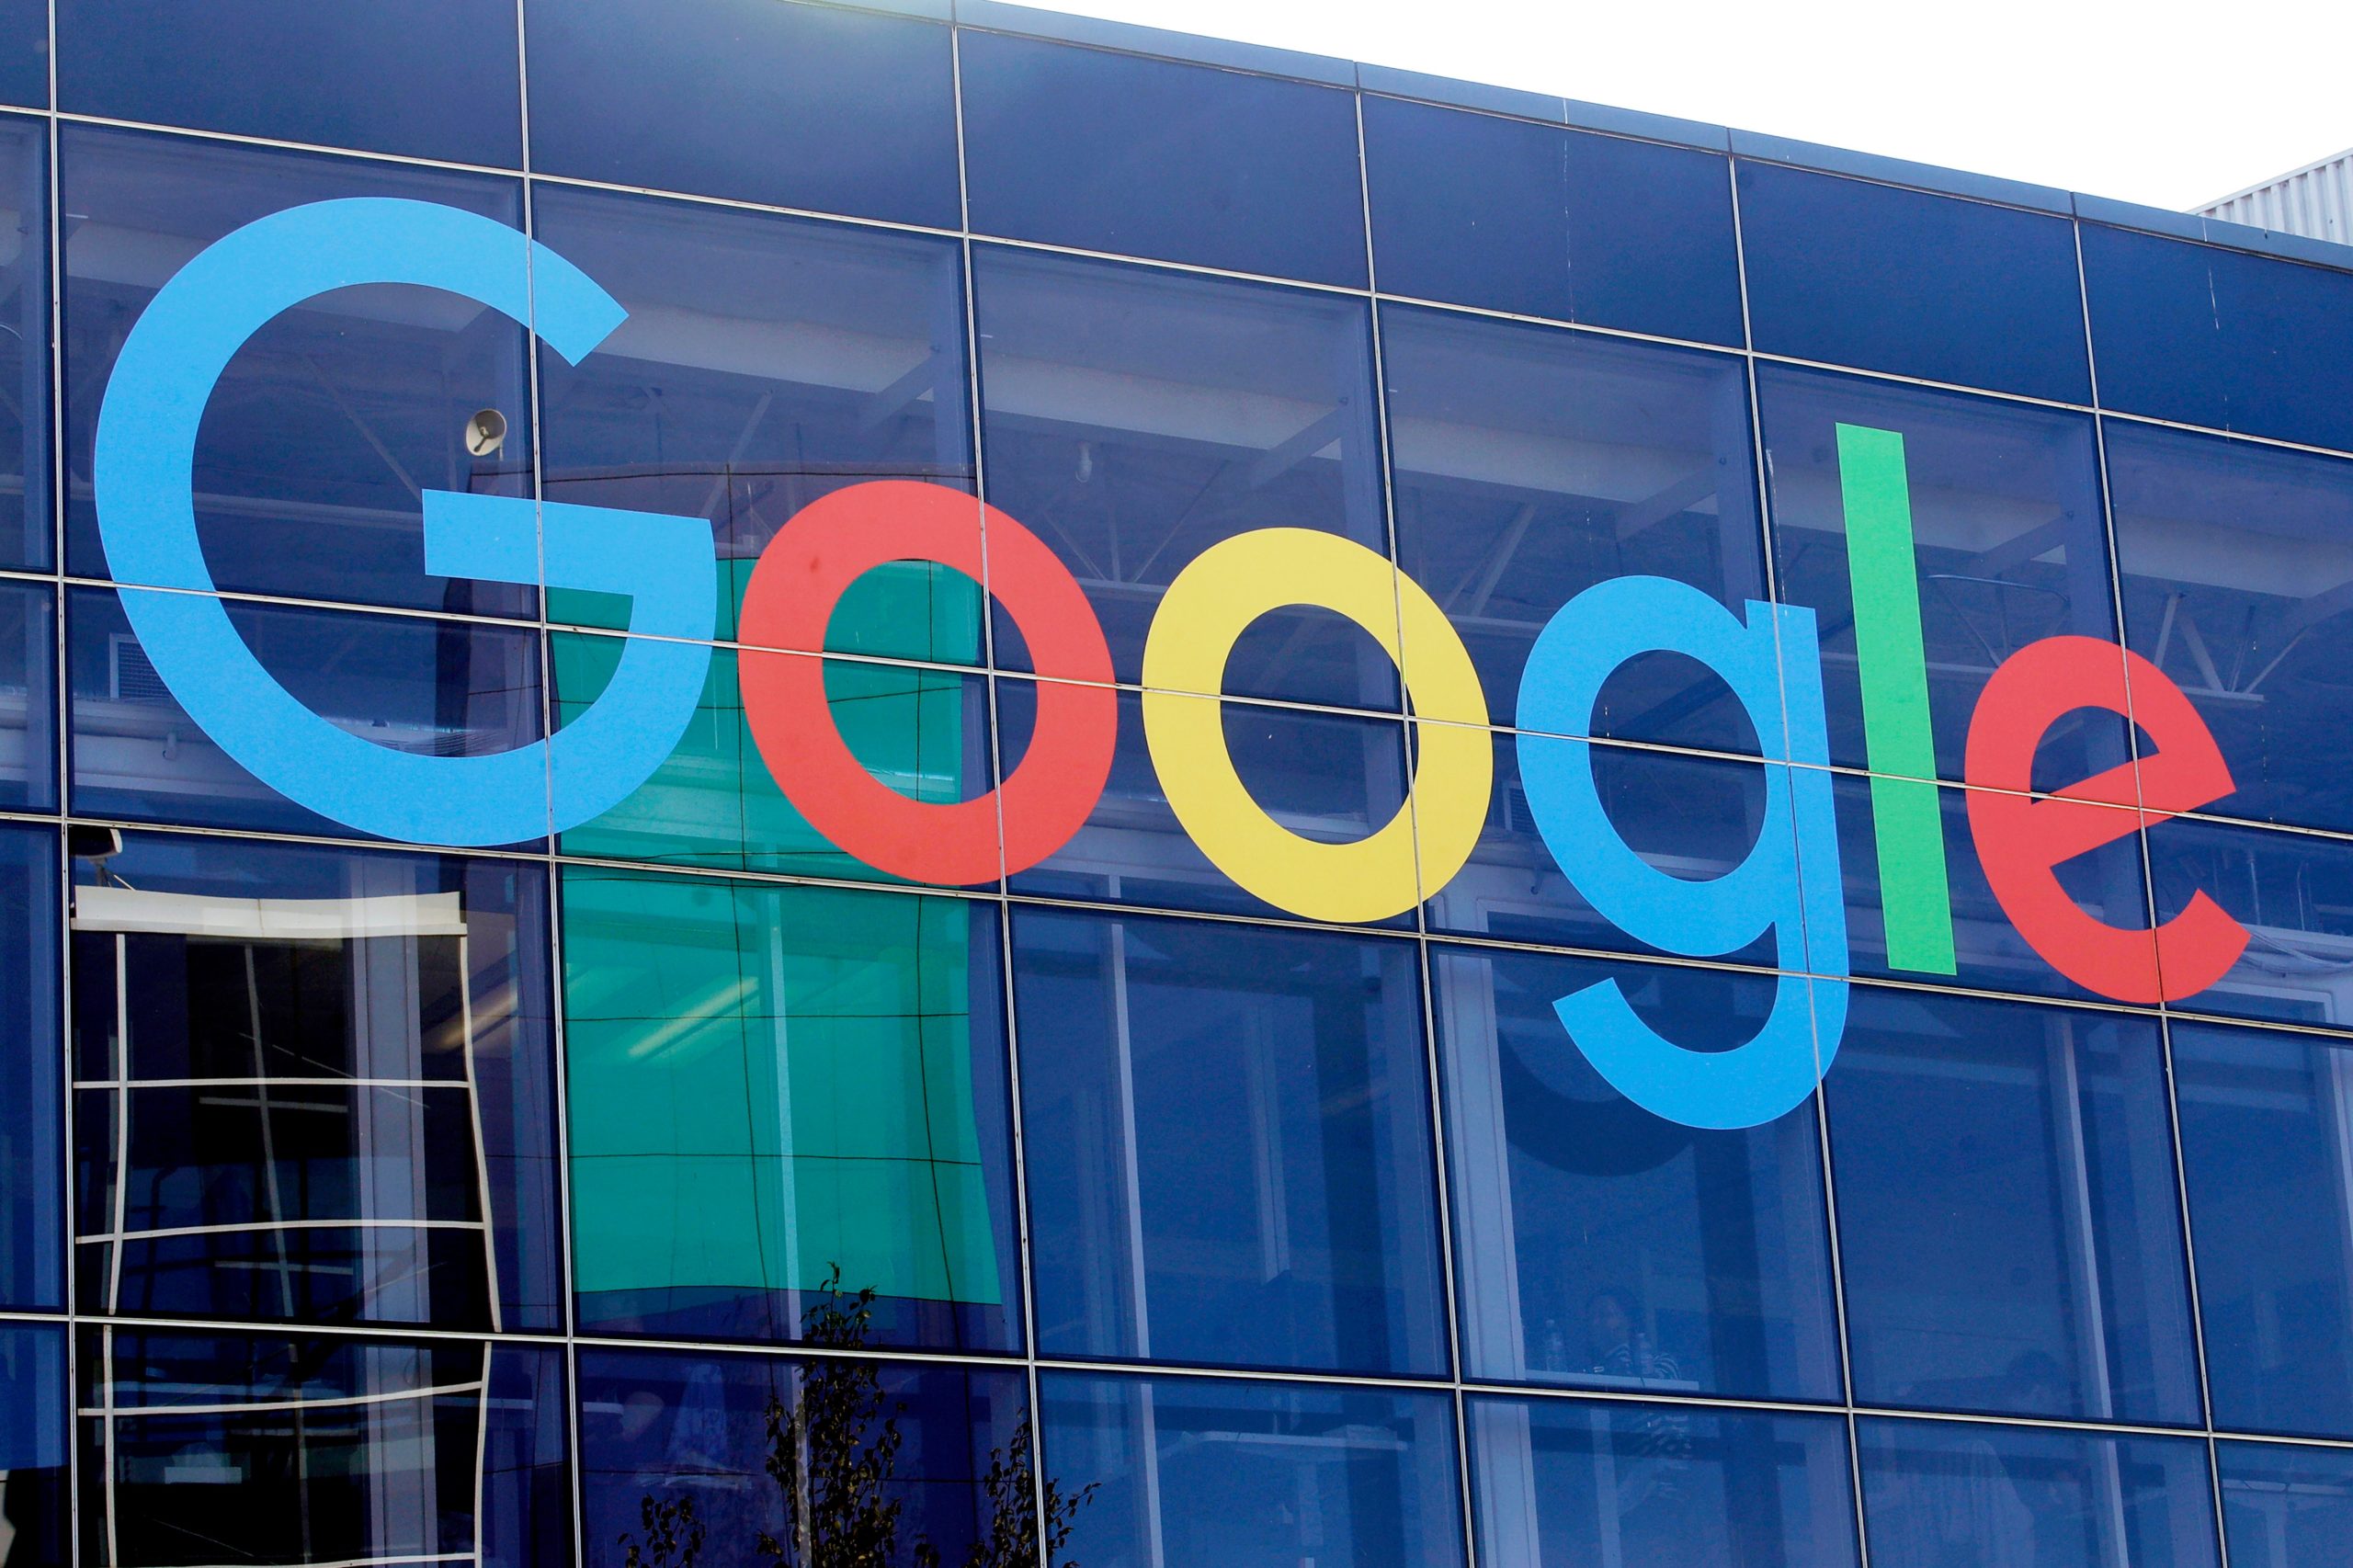 Black Google employee stopped by security because they didn’t believe he worked there